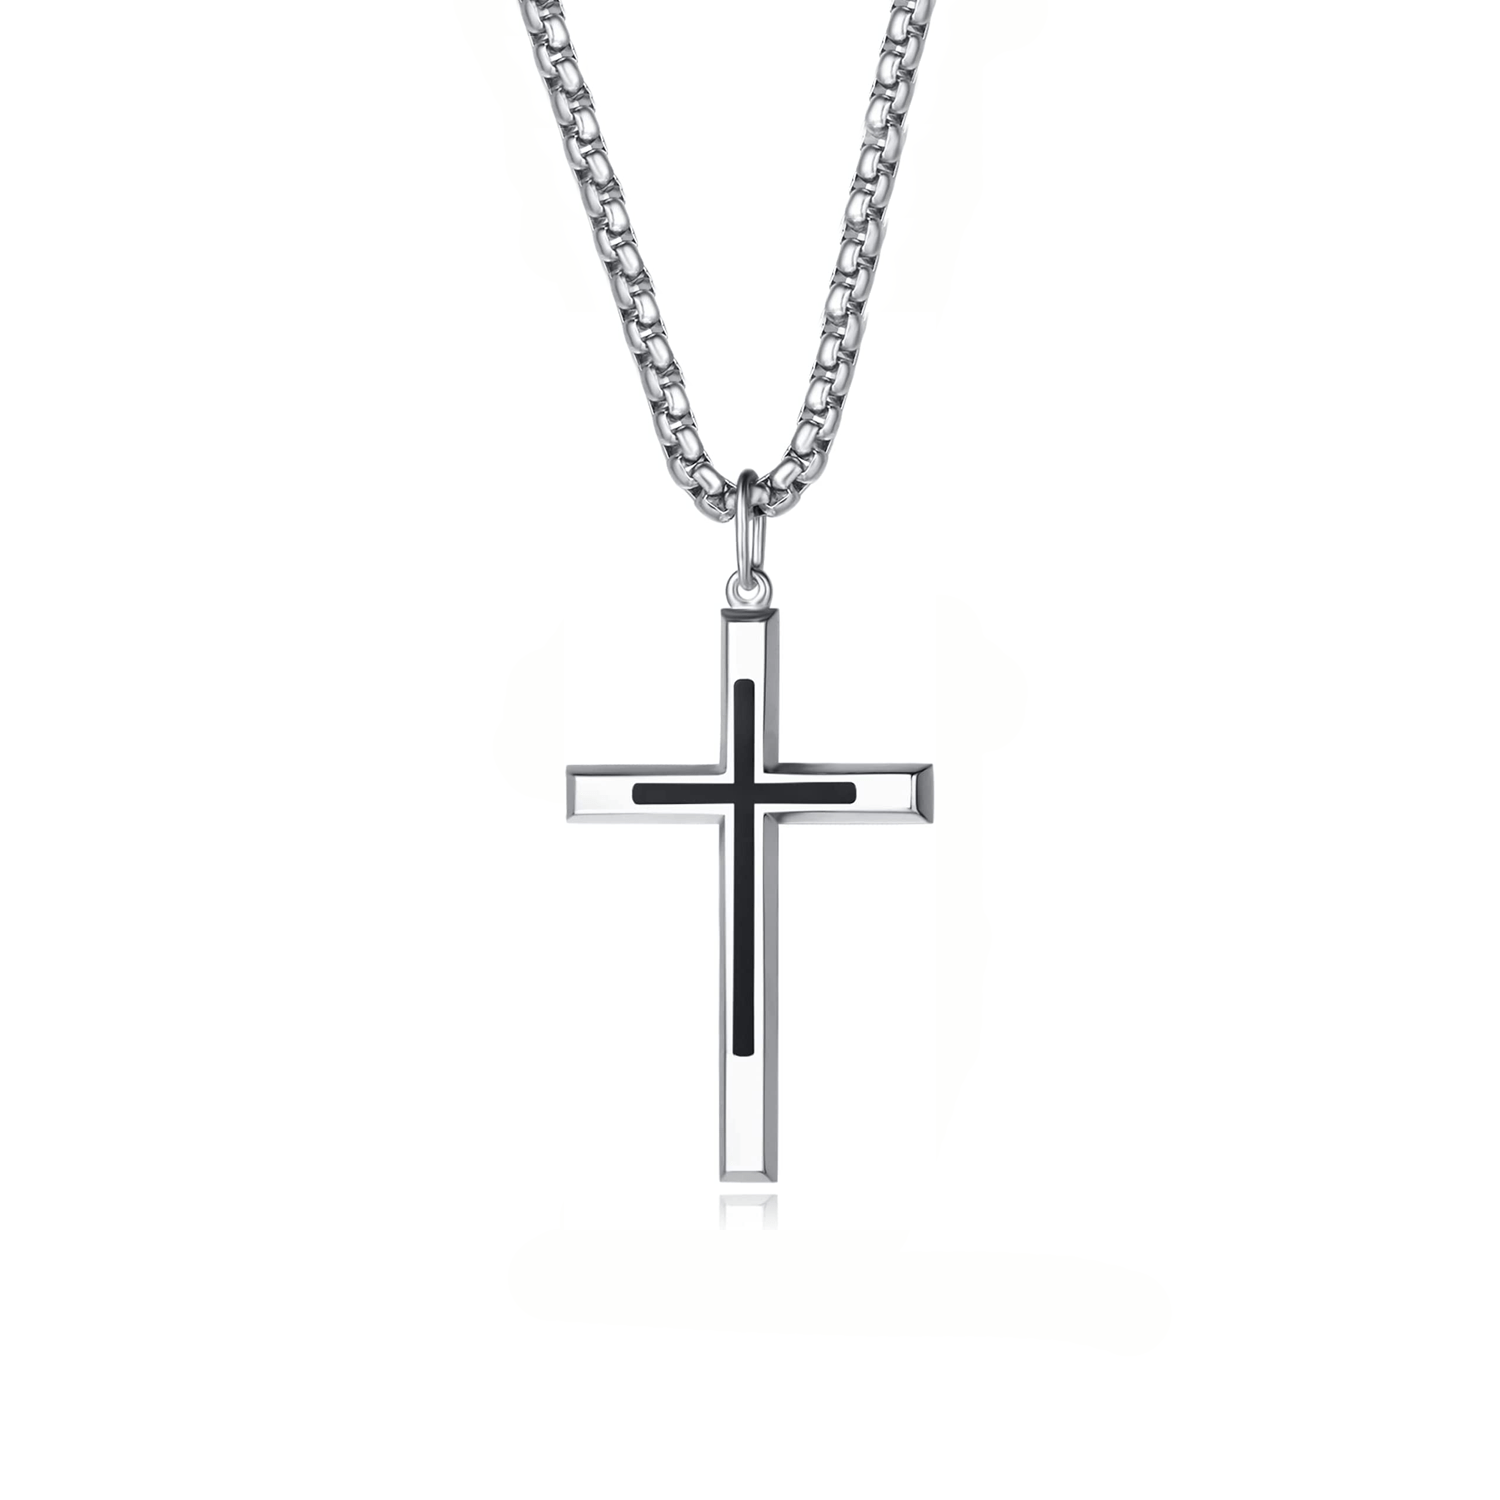 FANCIME Mens Black Highlight Cross 925 Silver Necklace Main